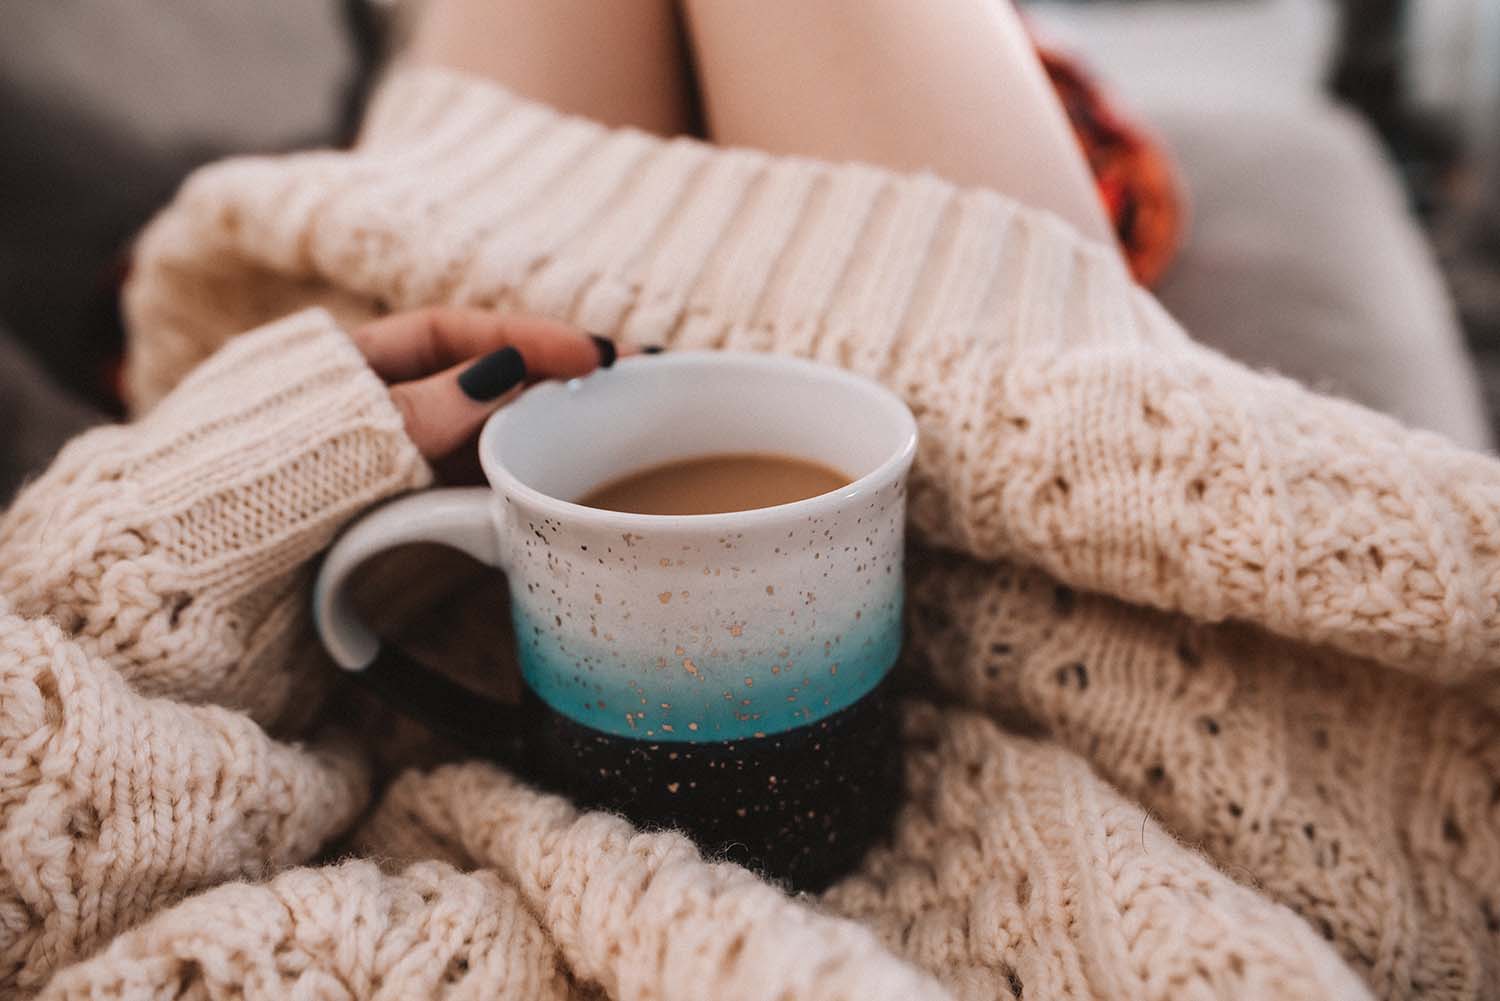 Recreating the Feeling of 'Home' in Your Life, Hygge and Wellbeing